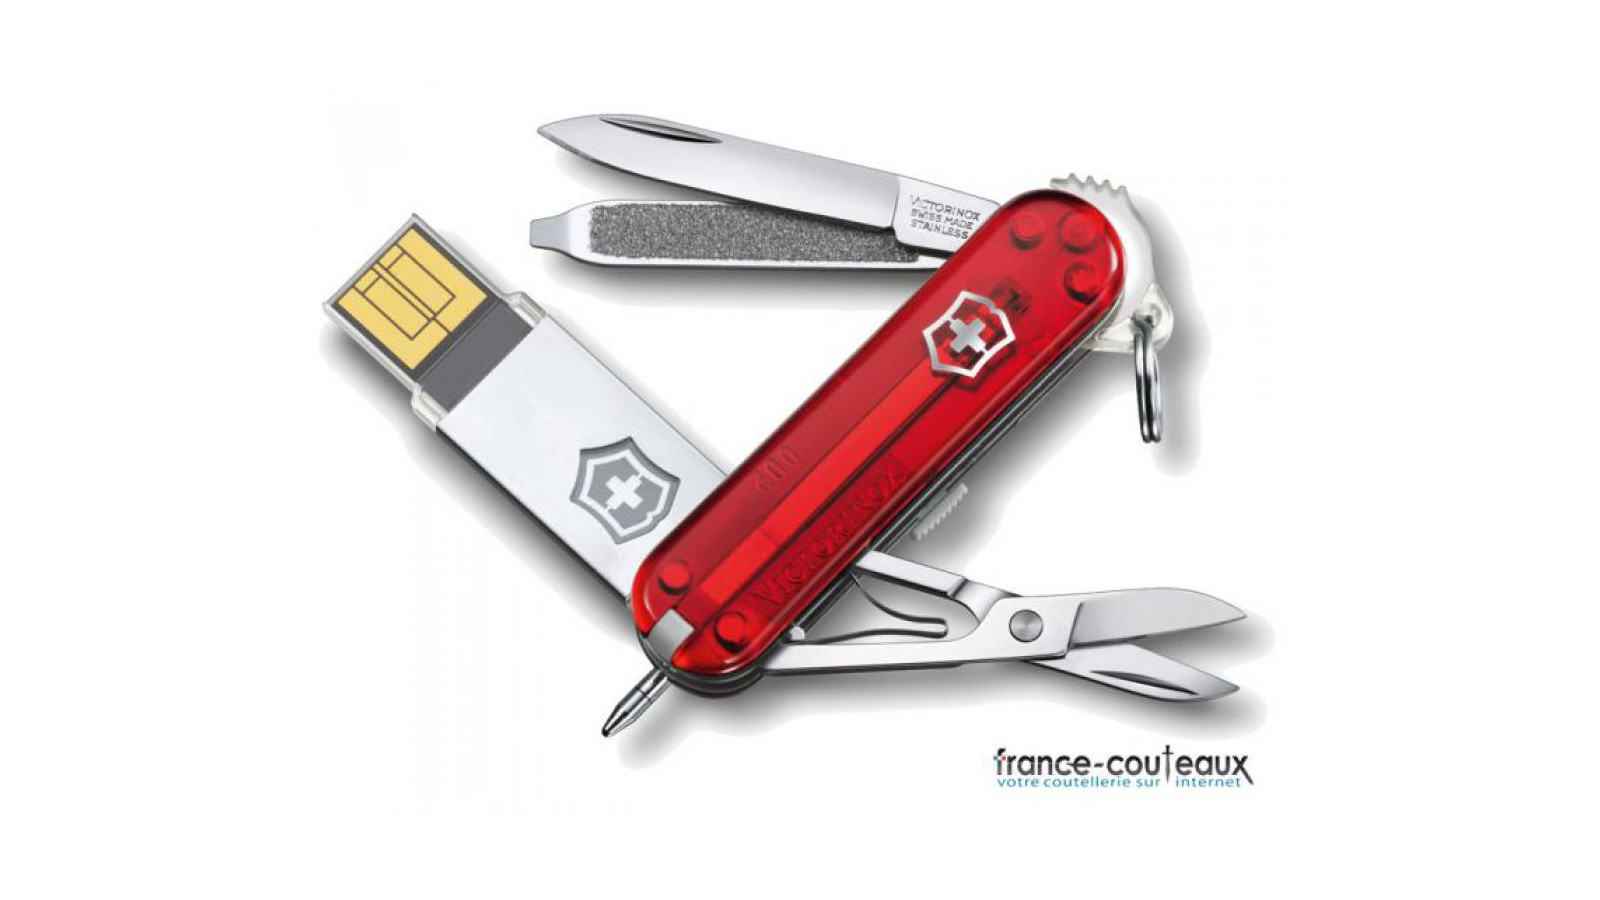 Couteau Suisse Victorinox - @Work USB 4GB